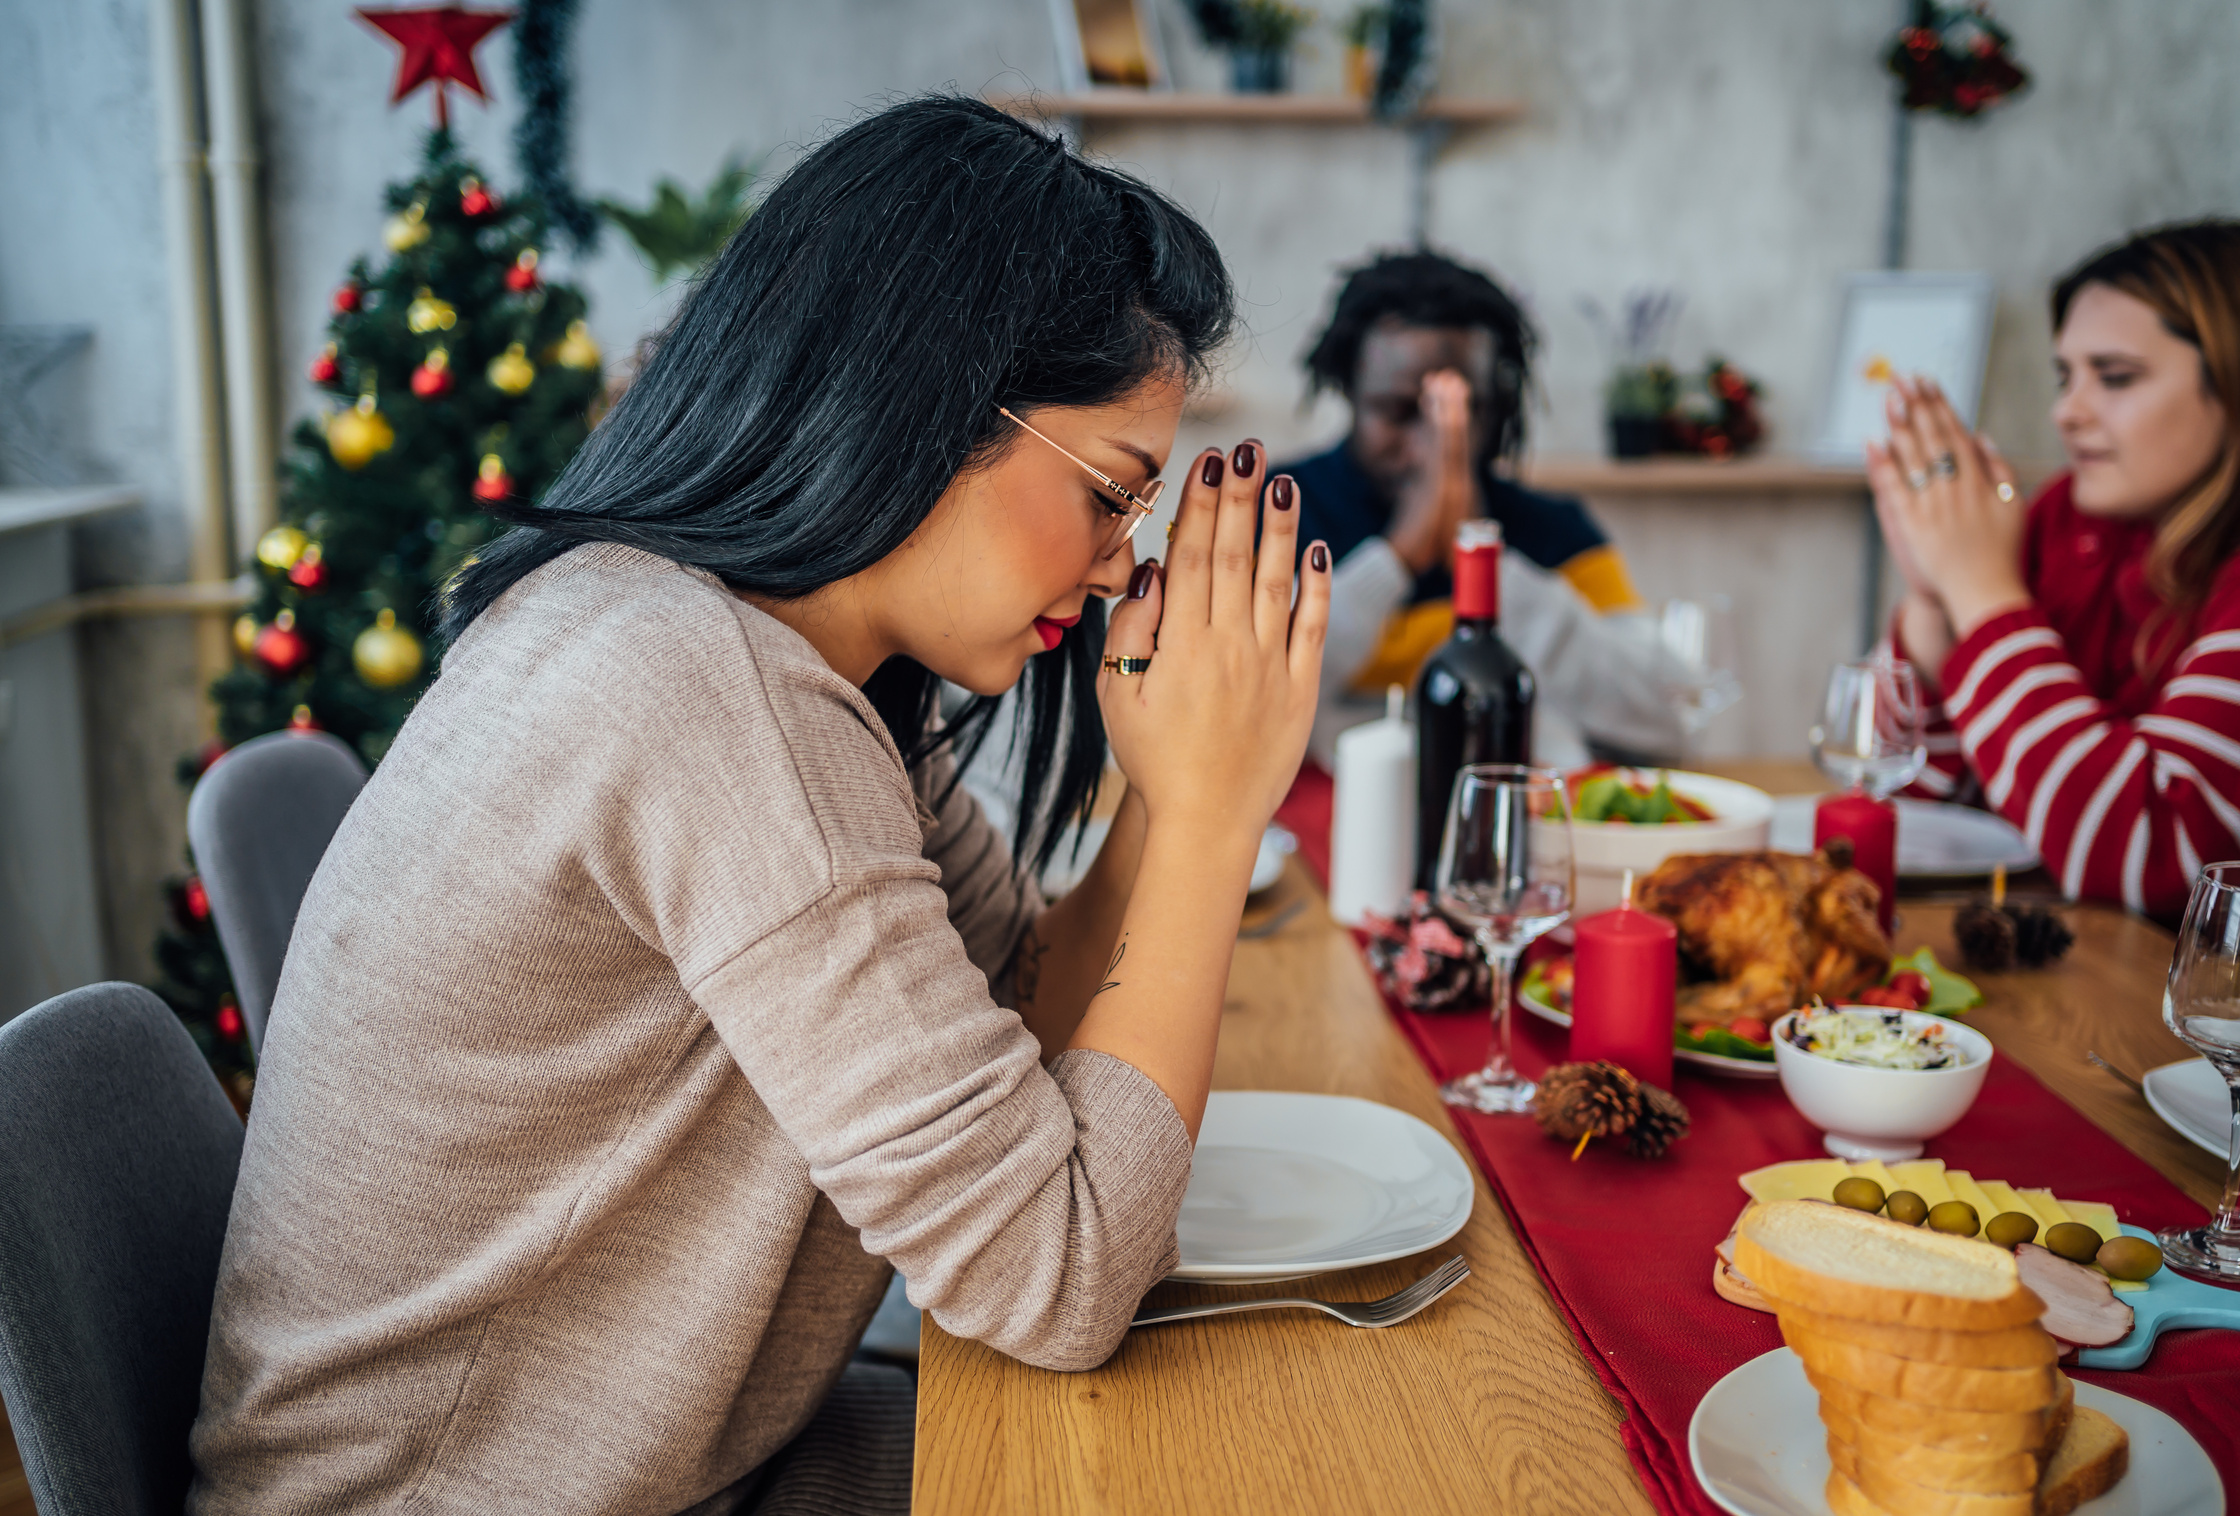 Woman praying before eating Christmas lunch